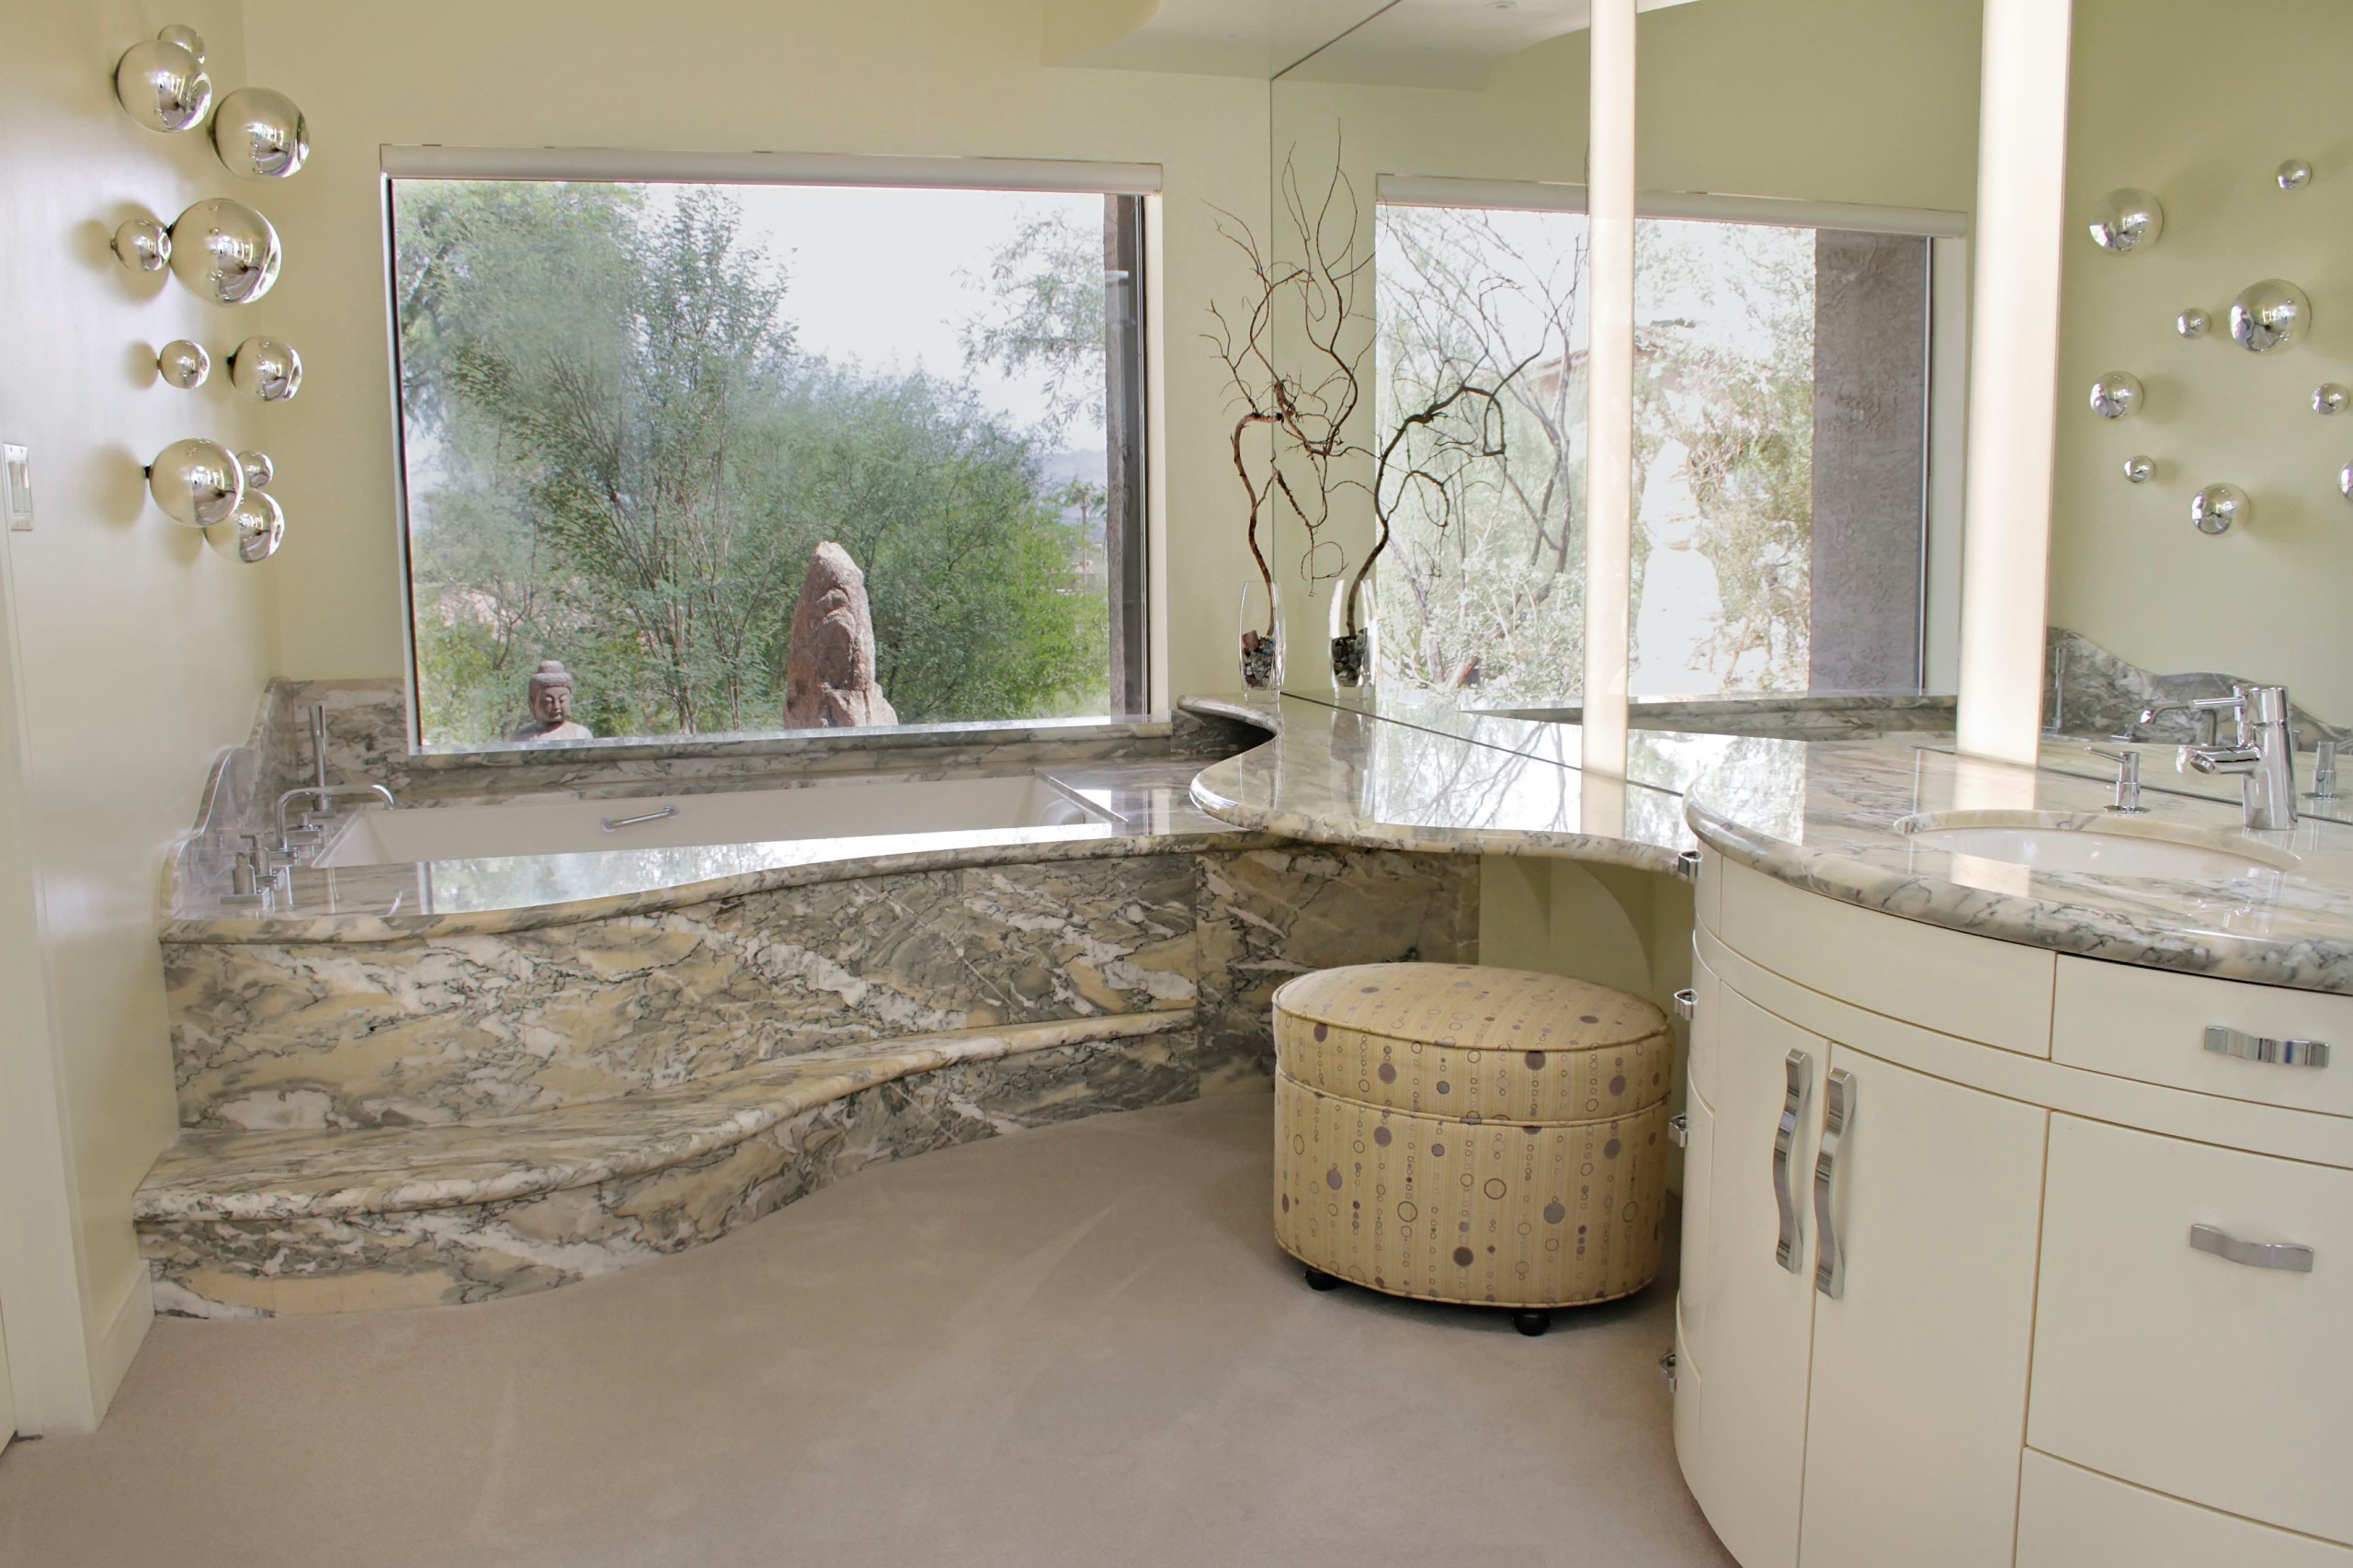 * 2012 SECOND PLACE WINNER - BATHROOM CATEGORY * ASID